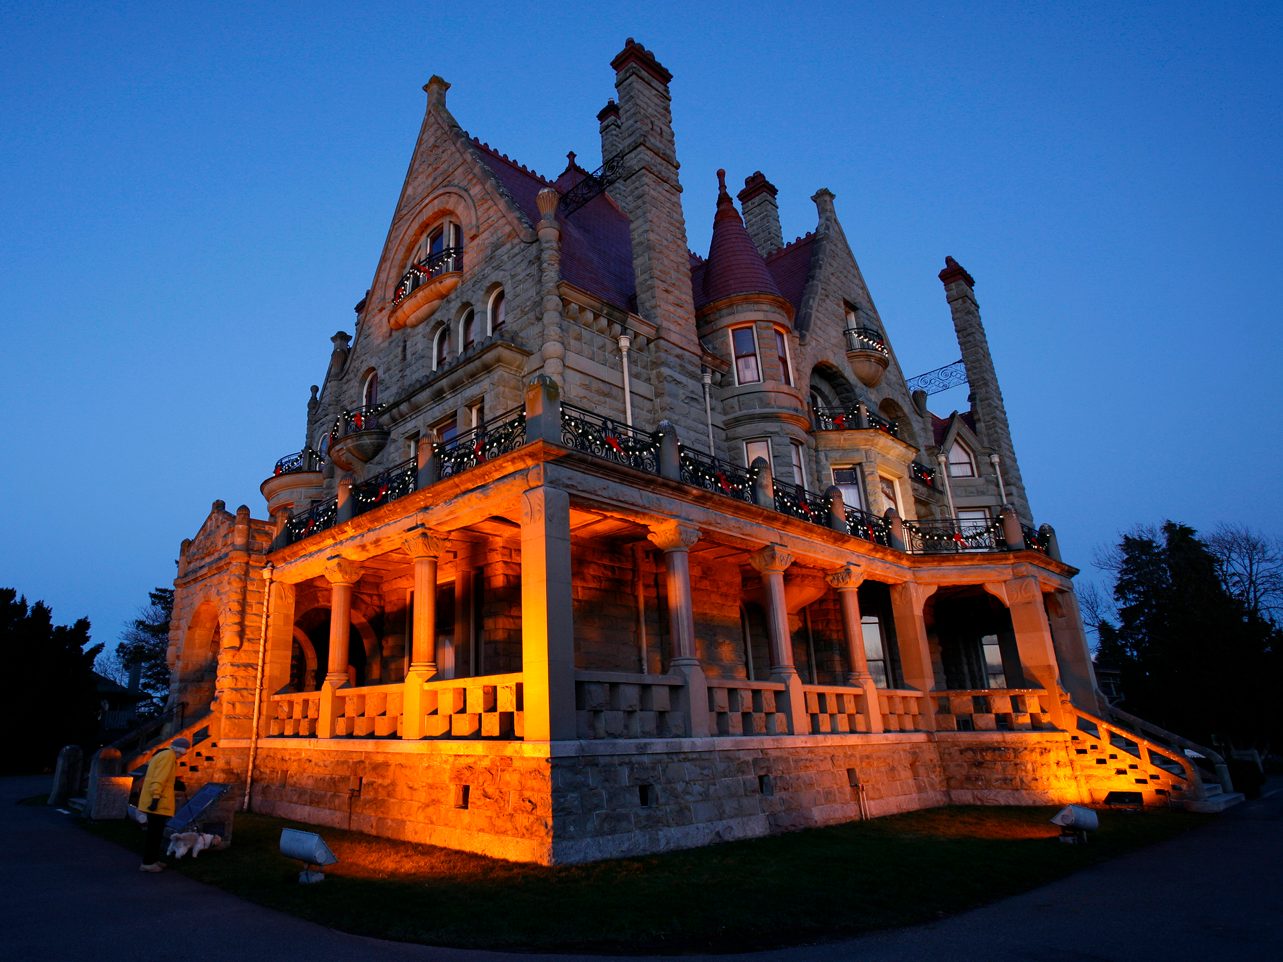 <p>You won’t find many <a href="https://www.readersdigest.ca/travel/canada/castles-in-canada/">castles in Canada</a>, but the few we do have go out of their way to impress. Built in the Scottish Baronial style, <a href="https://thecastle.ca/" rel="noopener noreferrer">Craigdarroch Castle</a> was the Victorian-era status symbol of coal baron Robert Dunsmuir. Situated on a hillside overlooking the city, the castle has been meticulously restored to its former glory. Visitors keen to get a glimpse of how the upper crust lived in the 1890s can take a self-guided tour through this National Historic Site. There are four floors to explore, plus a few juicy scandals—and ghost stories—to delve into.</p> <p>Check out the <a href="https://www.readersdigest.ca/travel/canada/canadas-10-most-haunted-places/">most haunted places in Canada</a>.</p>